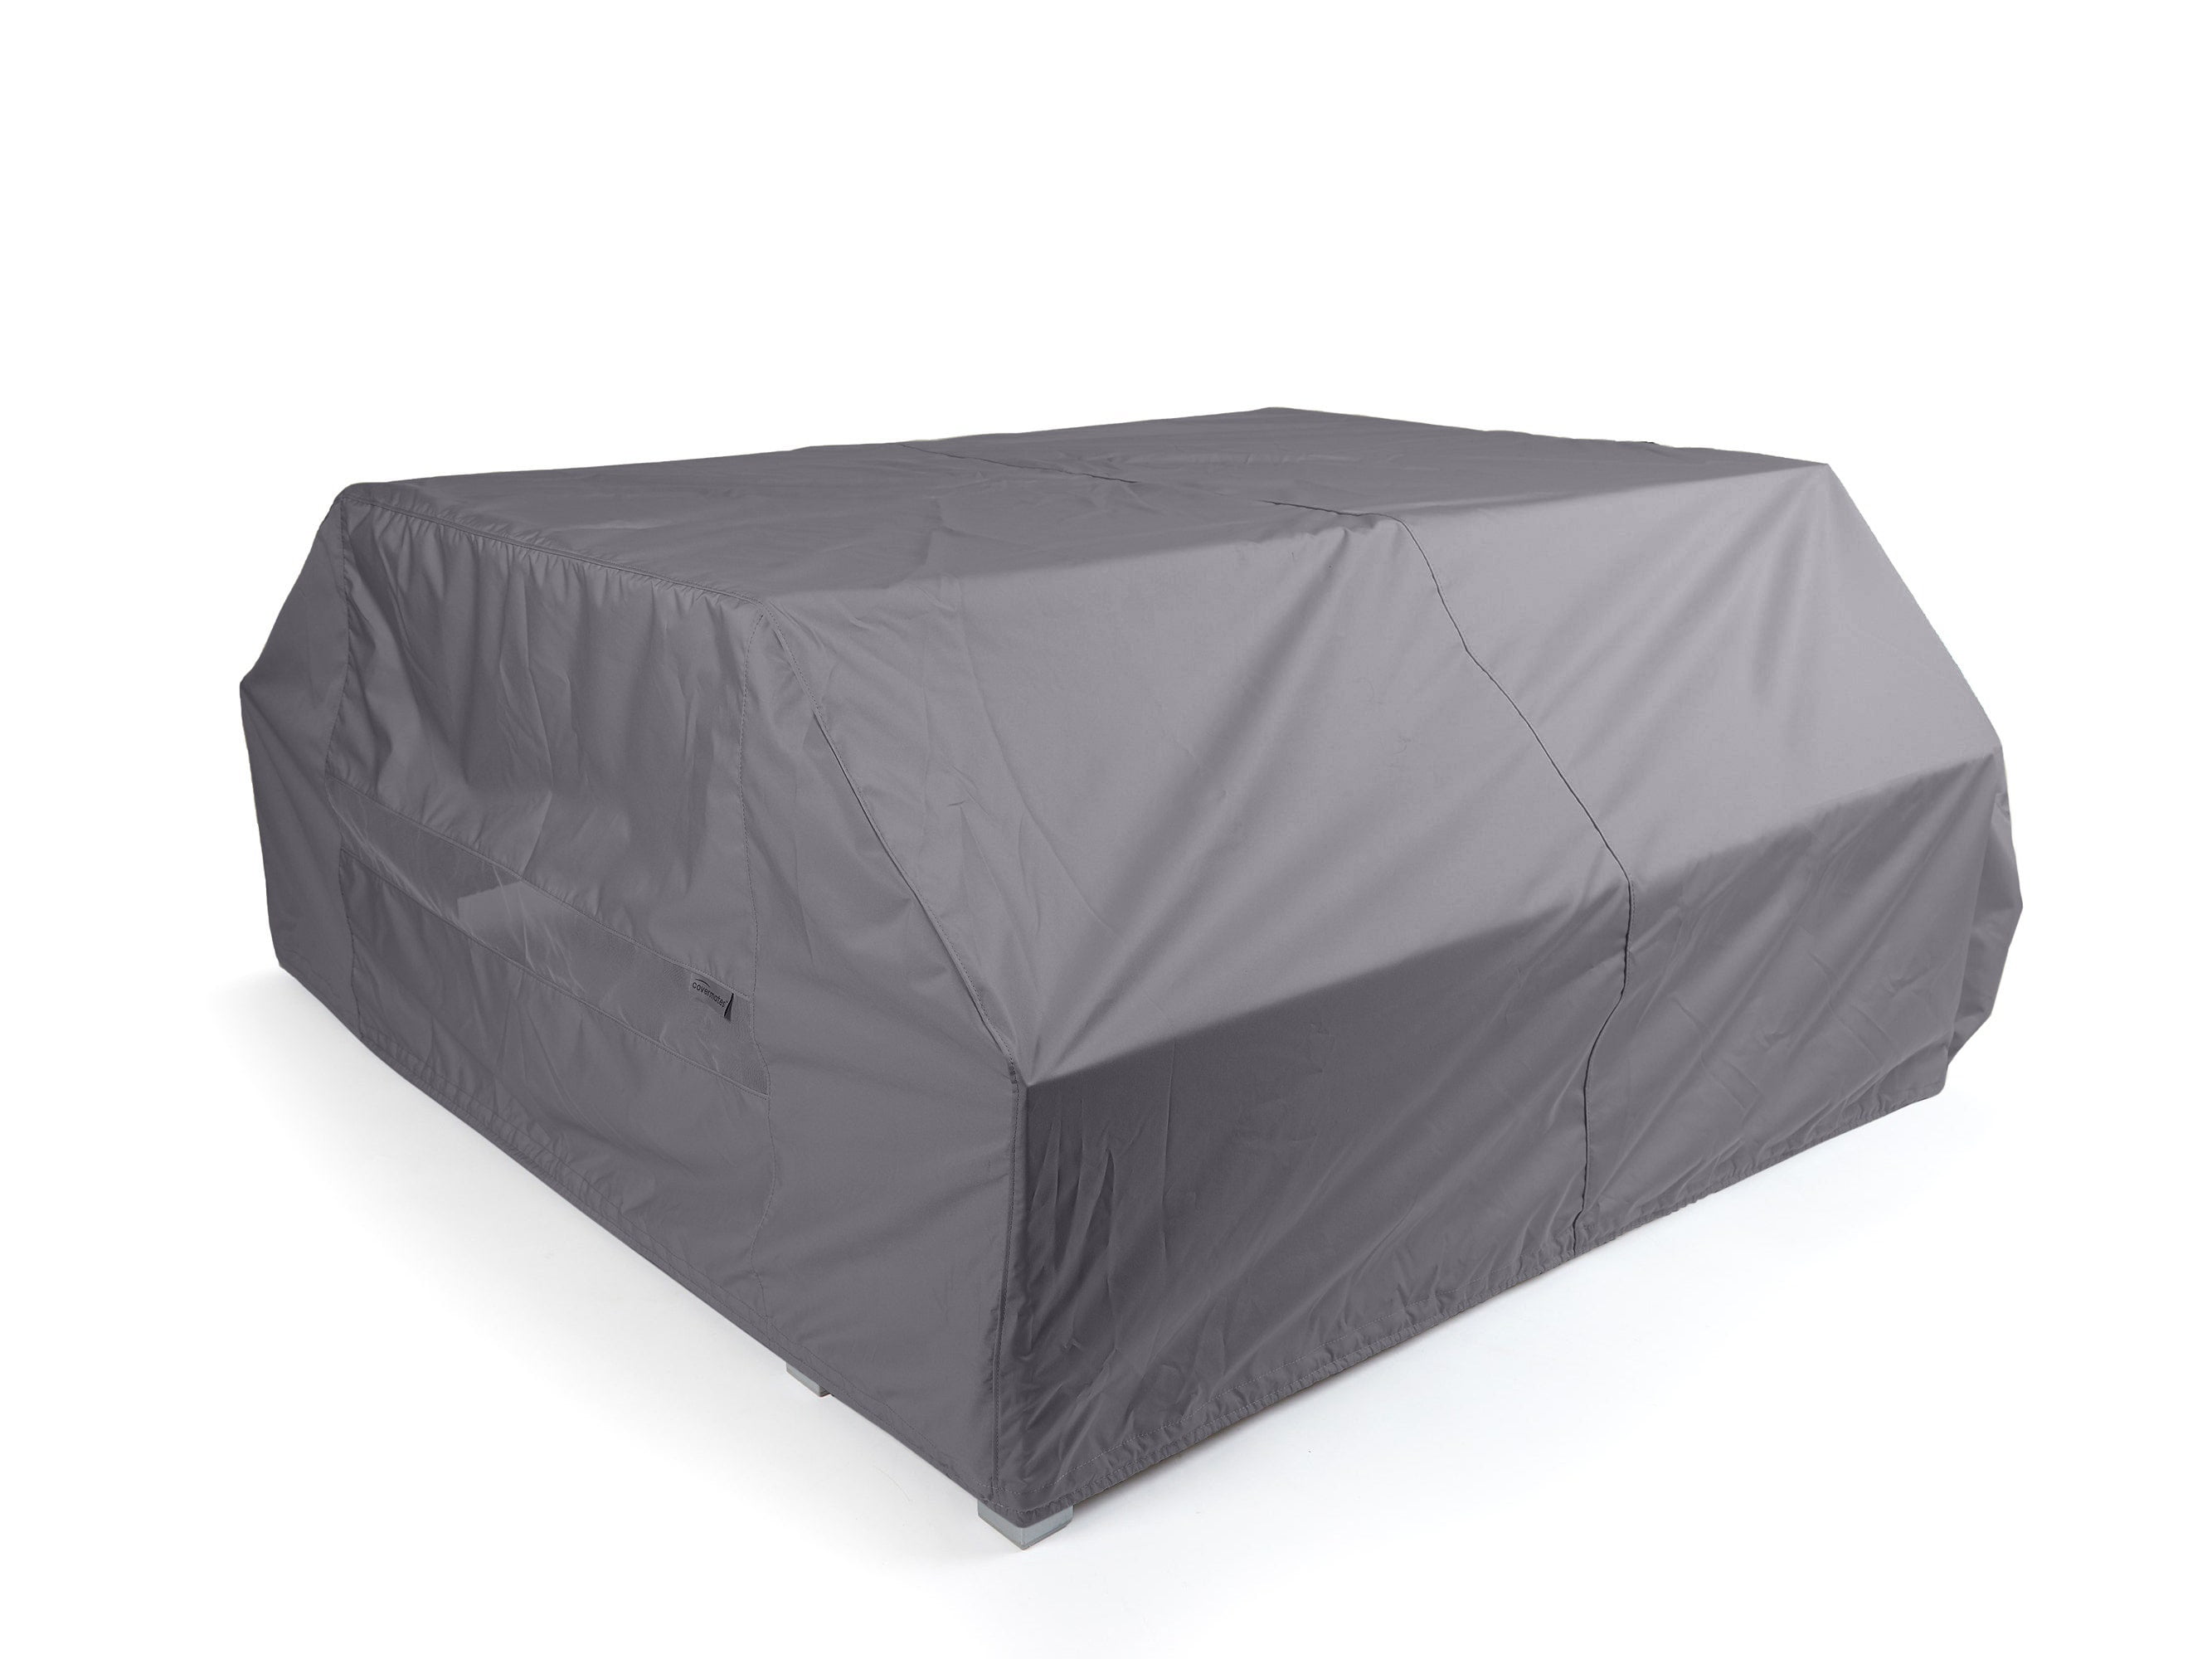 Black Covermates Round Dining Table Cover Mesh Ventilation Patio Table Covers Water-Resistant Polyester 